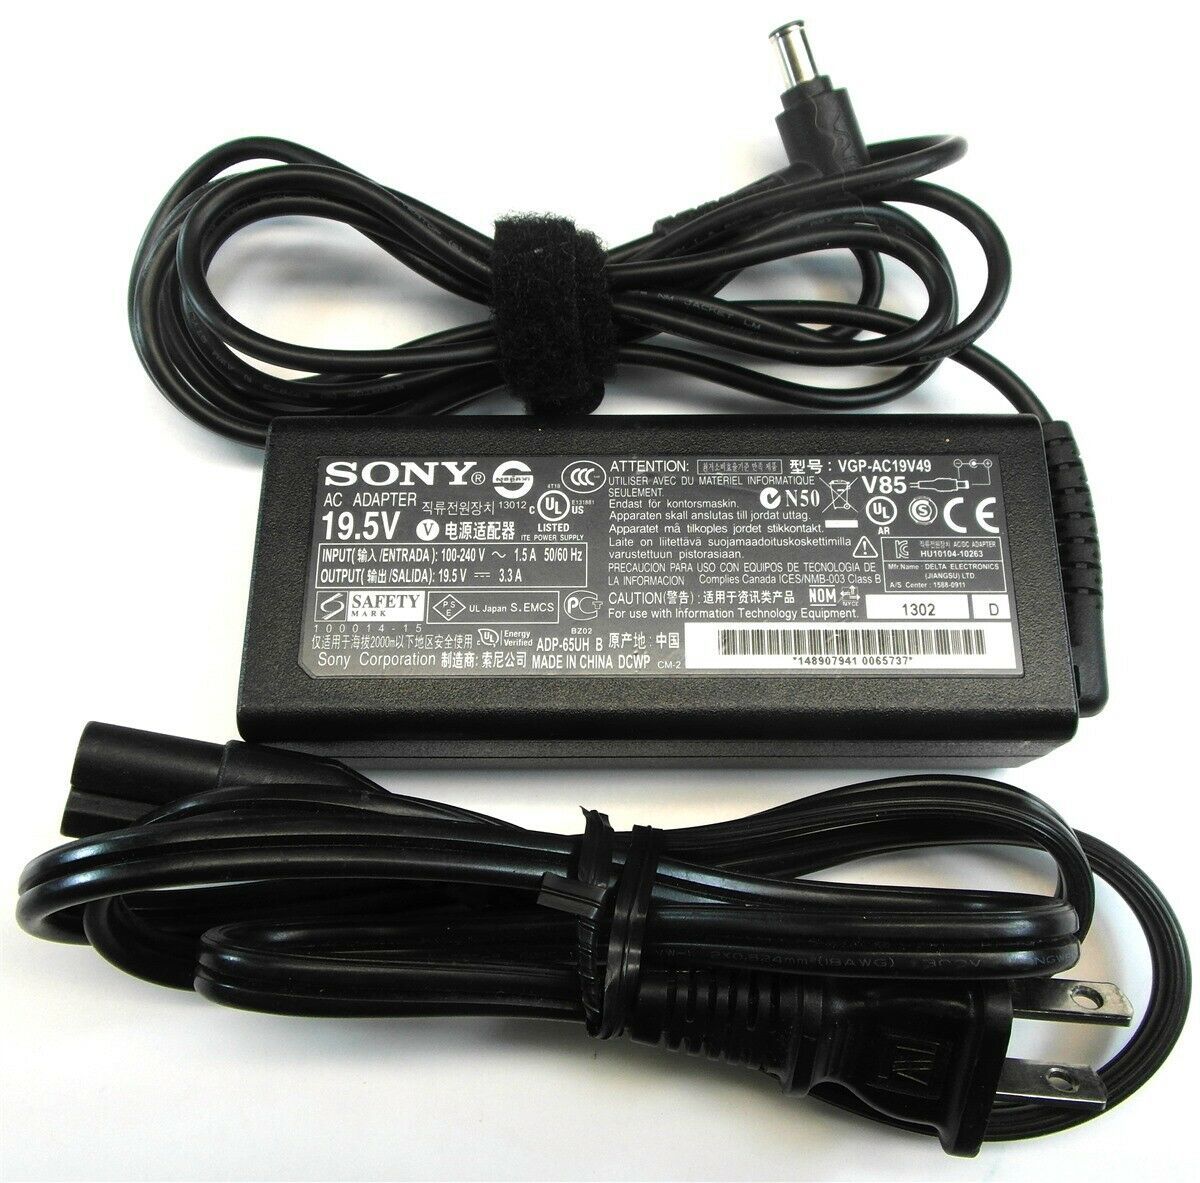 NEW Sony VGP-AC19V49 ADP-65UH B 65W 19.5V 3.3A Laptop Charger AC Adapter Power Supply - Click Image to Close